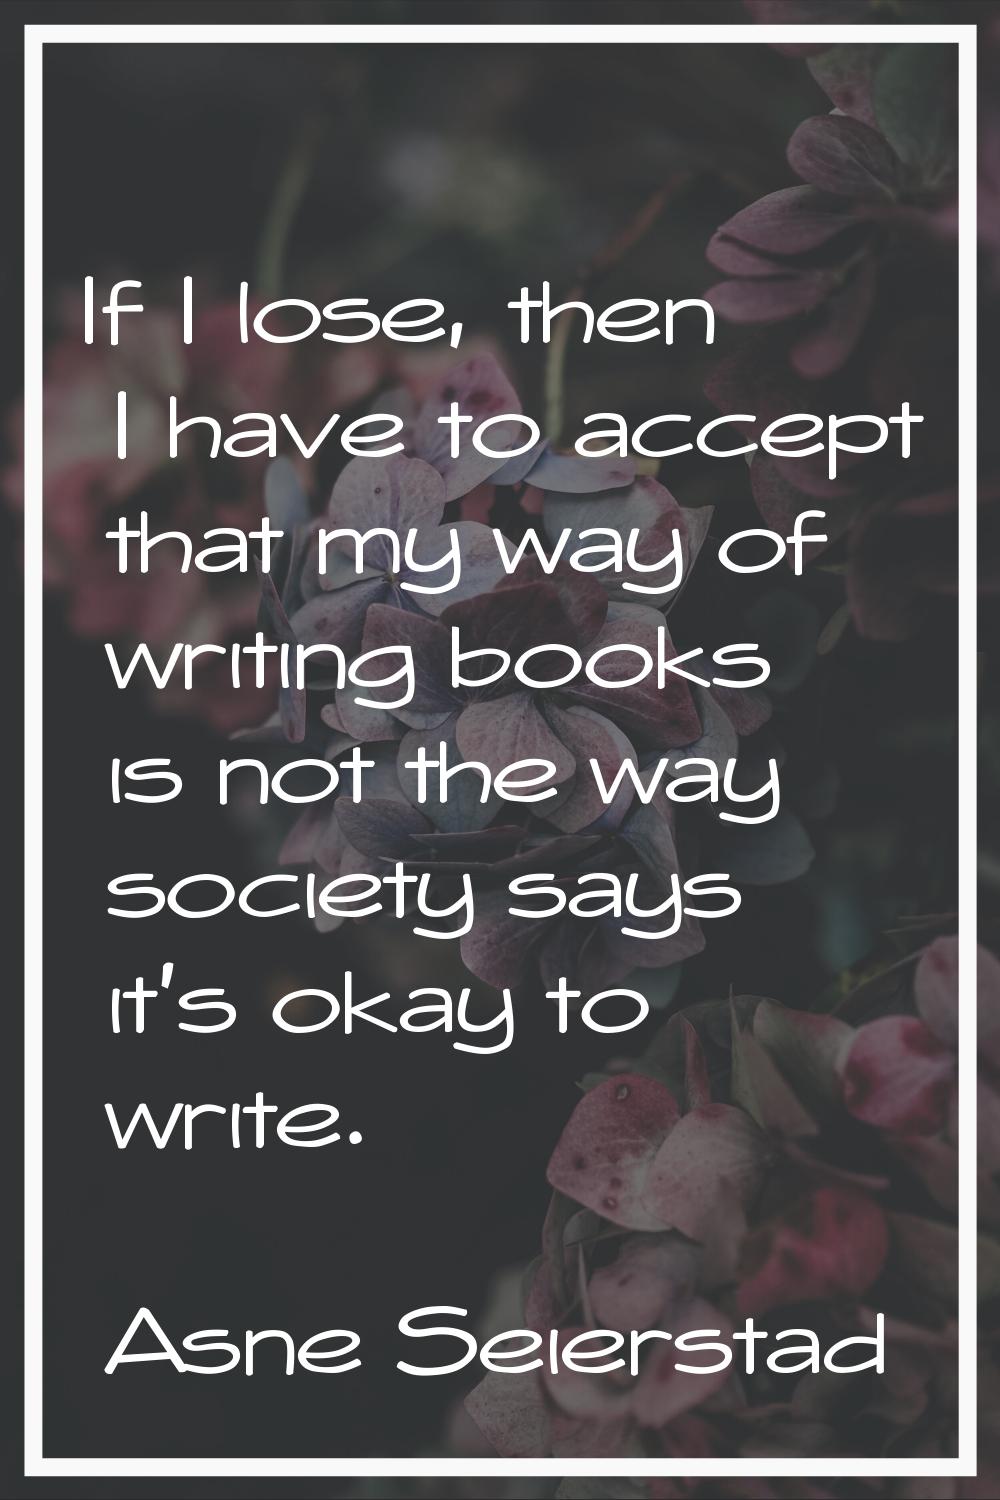 If I lose, then I have to accept that my way of writing books is not the way society says it's okay